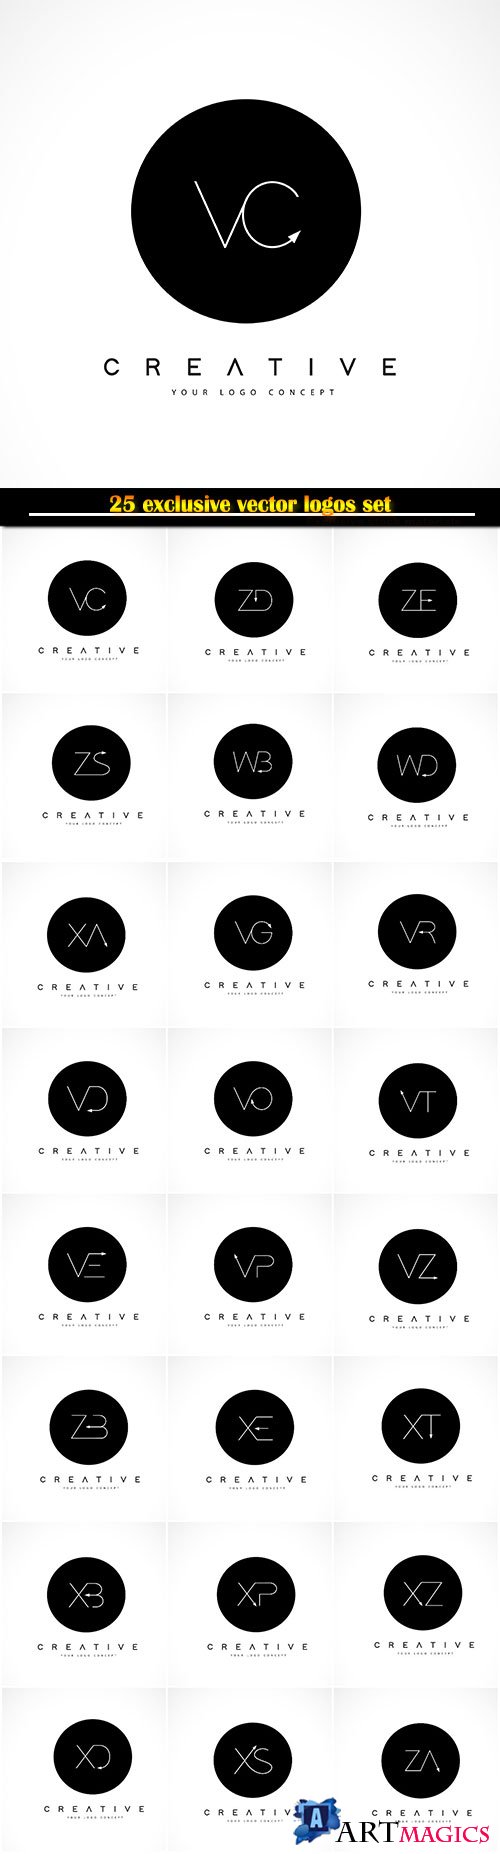 Logo vector design with black and white creative text letter